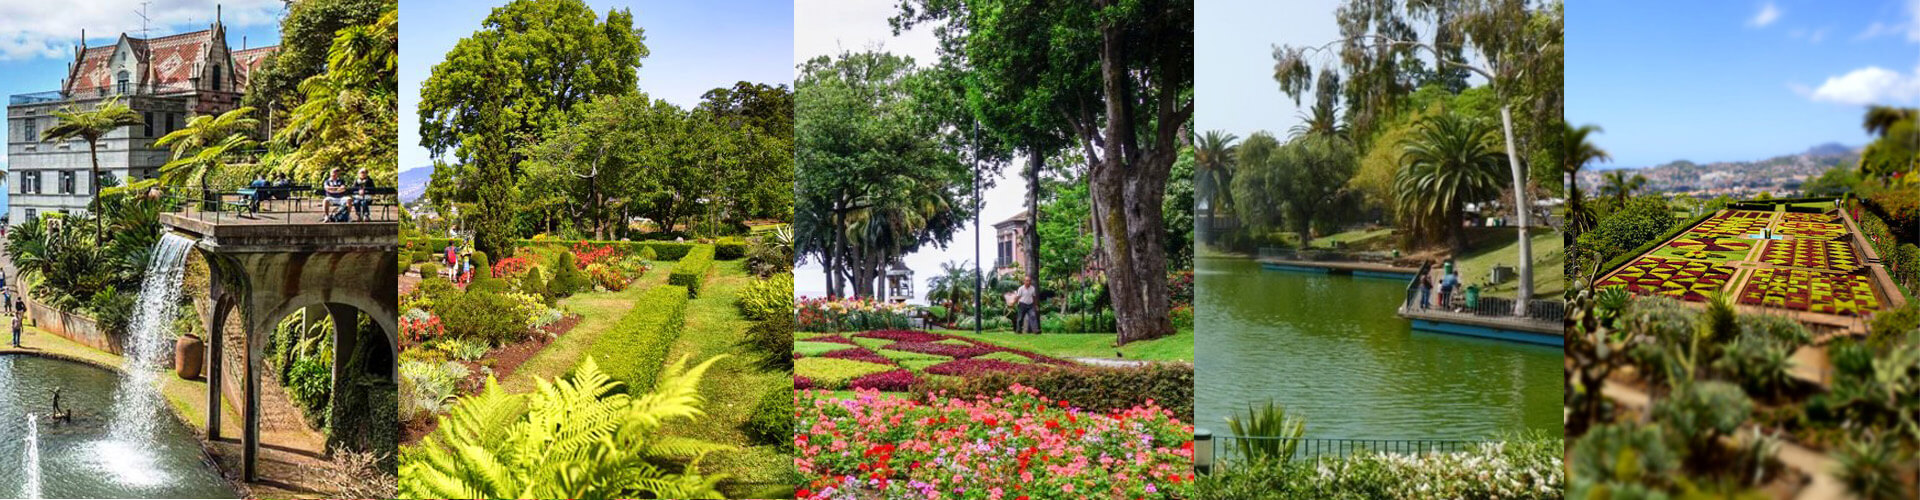 5 Gardens You Must Visit in Funchal, Madeira